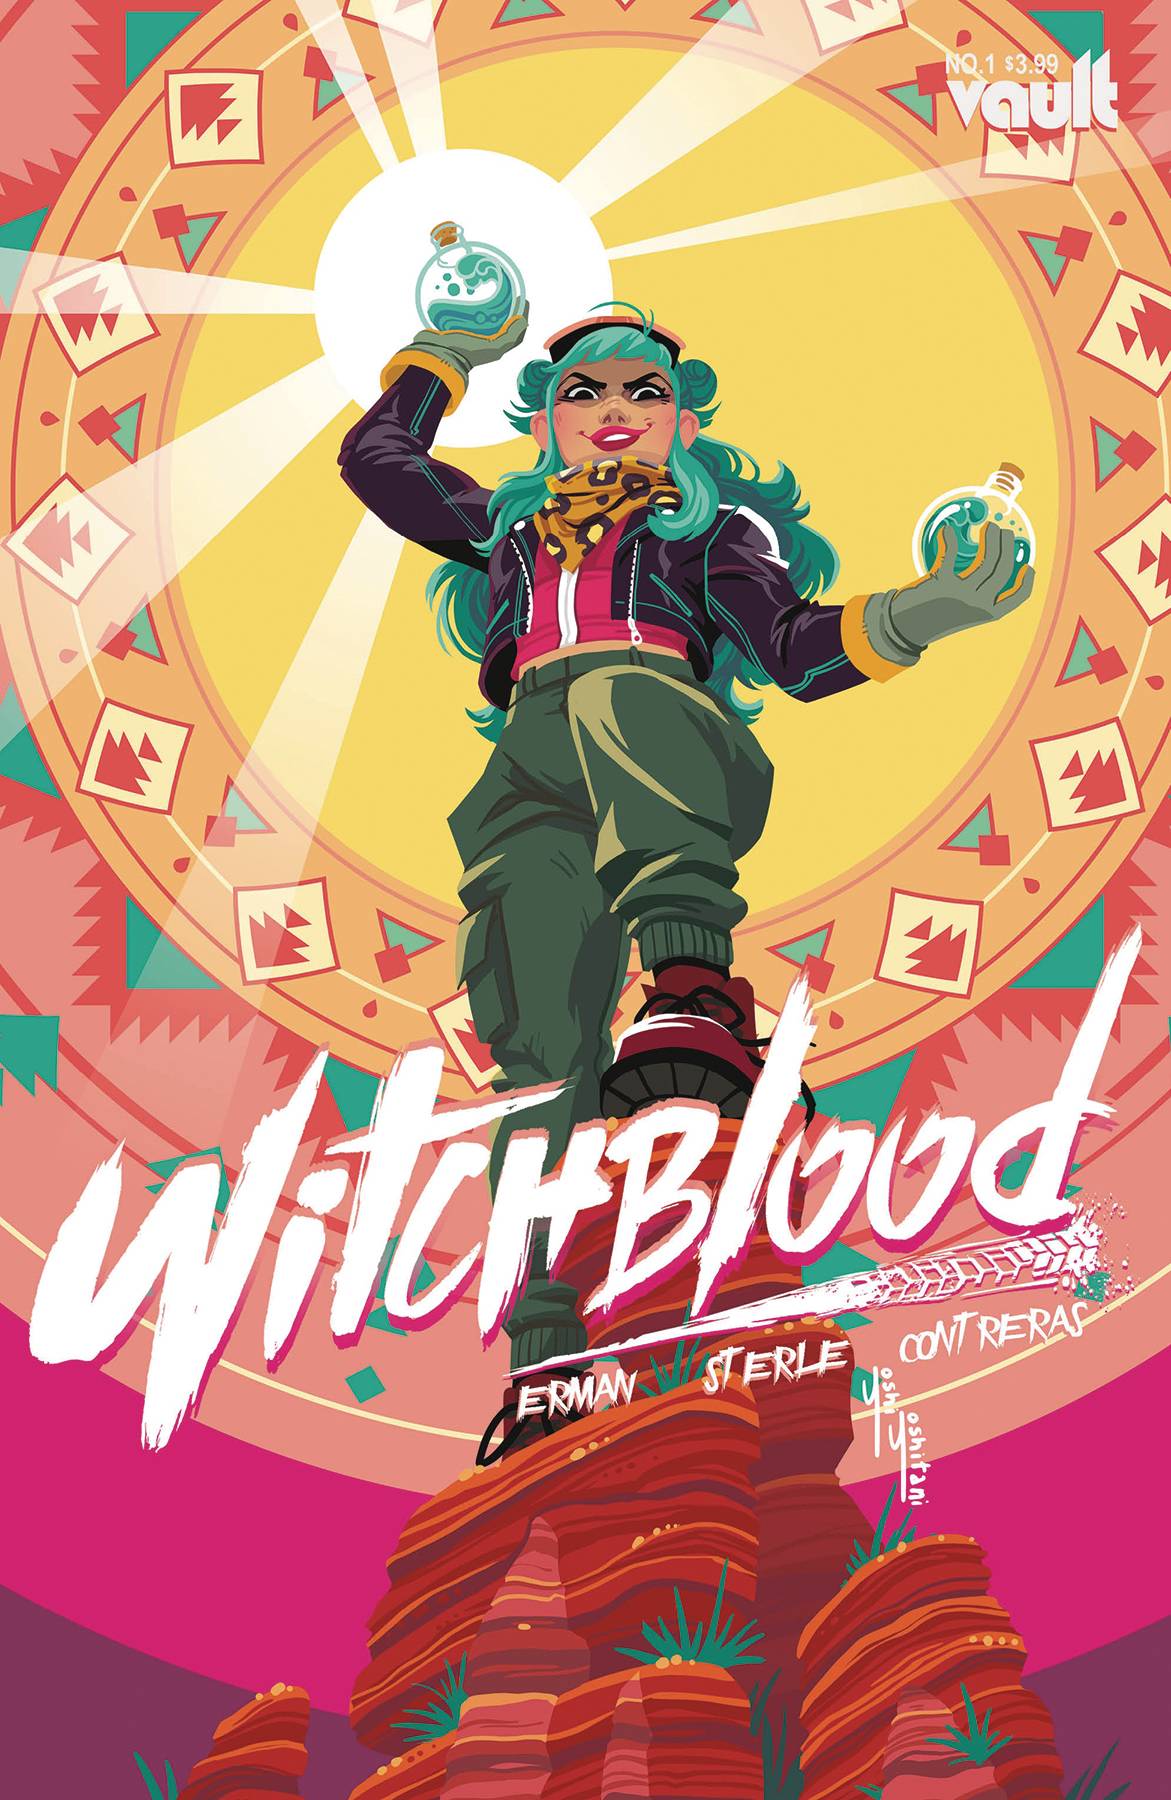 Witchblood #1 Cover F 1 for 50 Incentive Yoshitani Foil